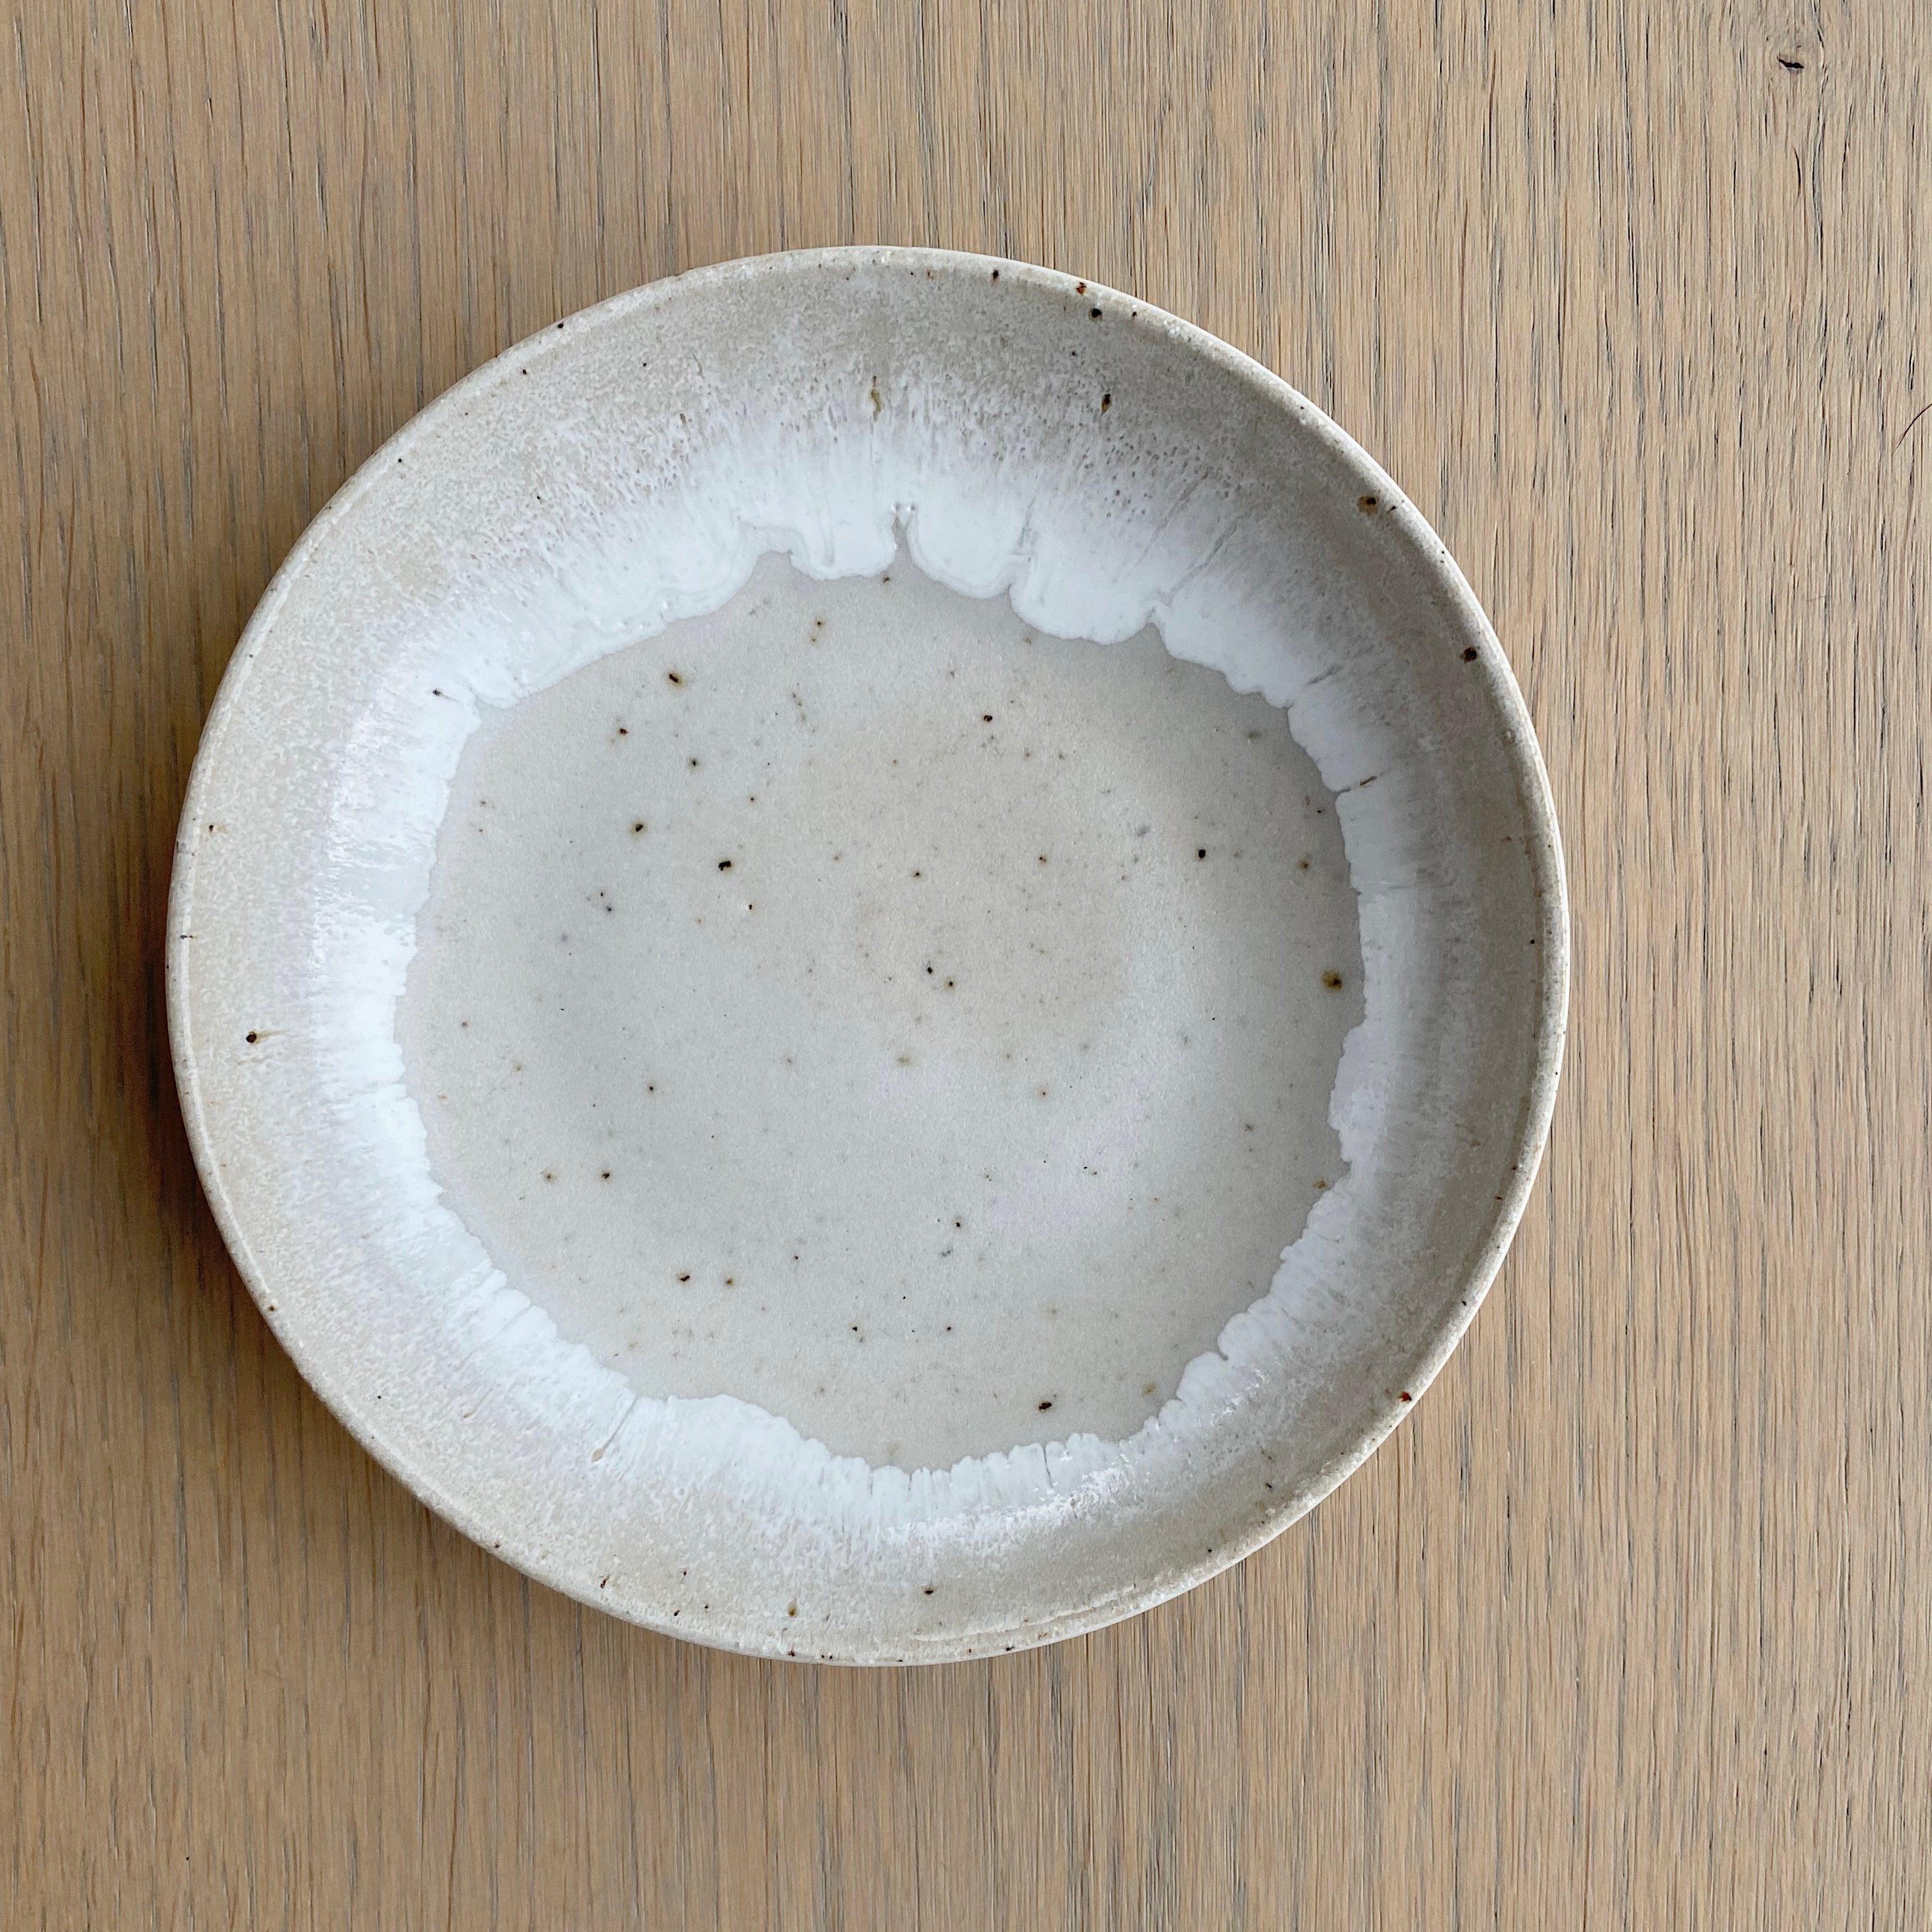 Tasja P small (low) breakfast bowl - off white and white